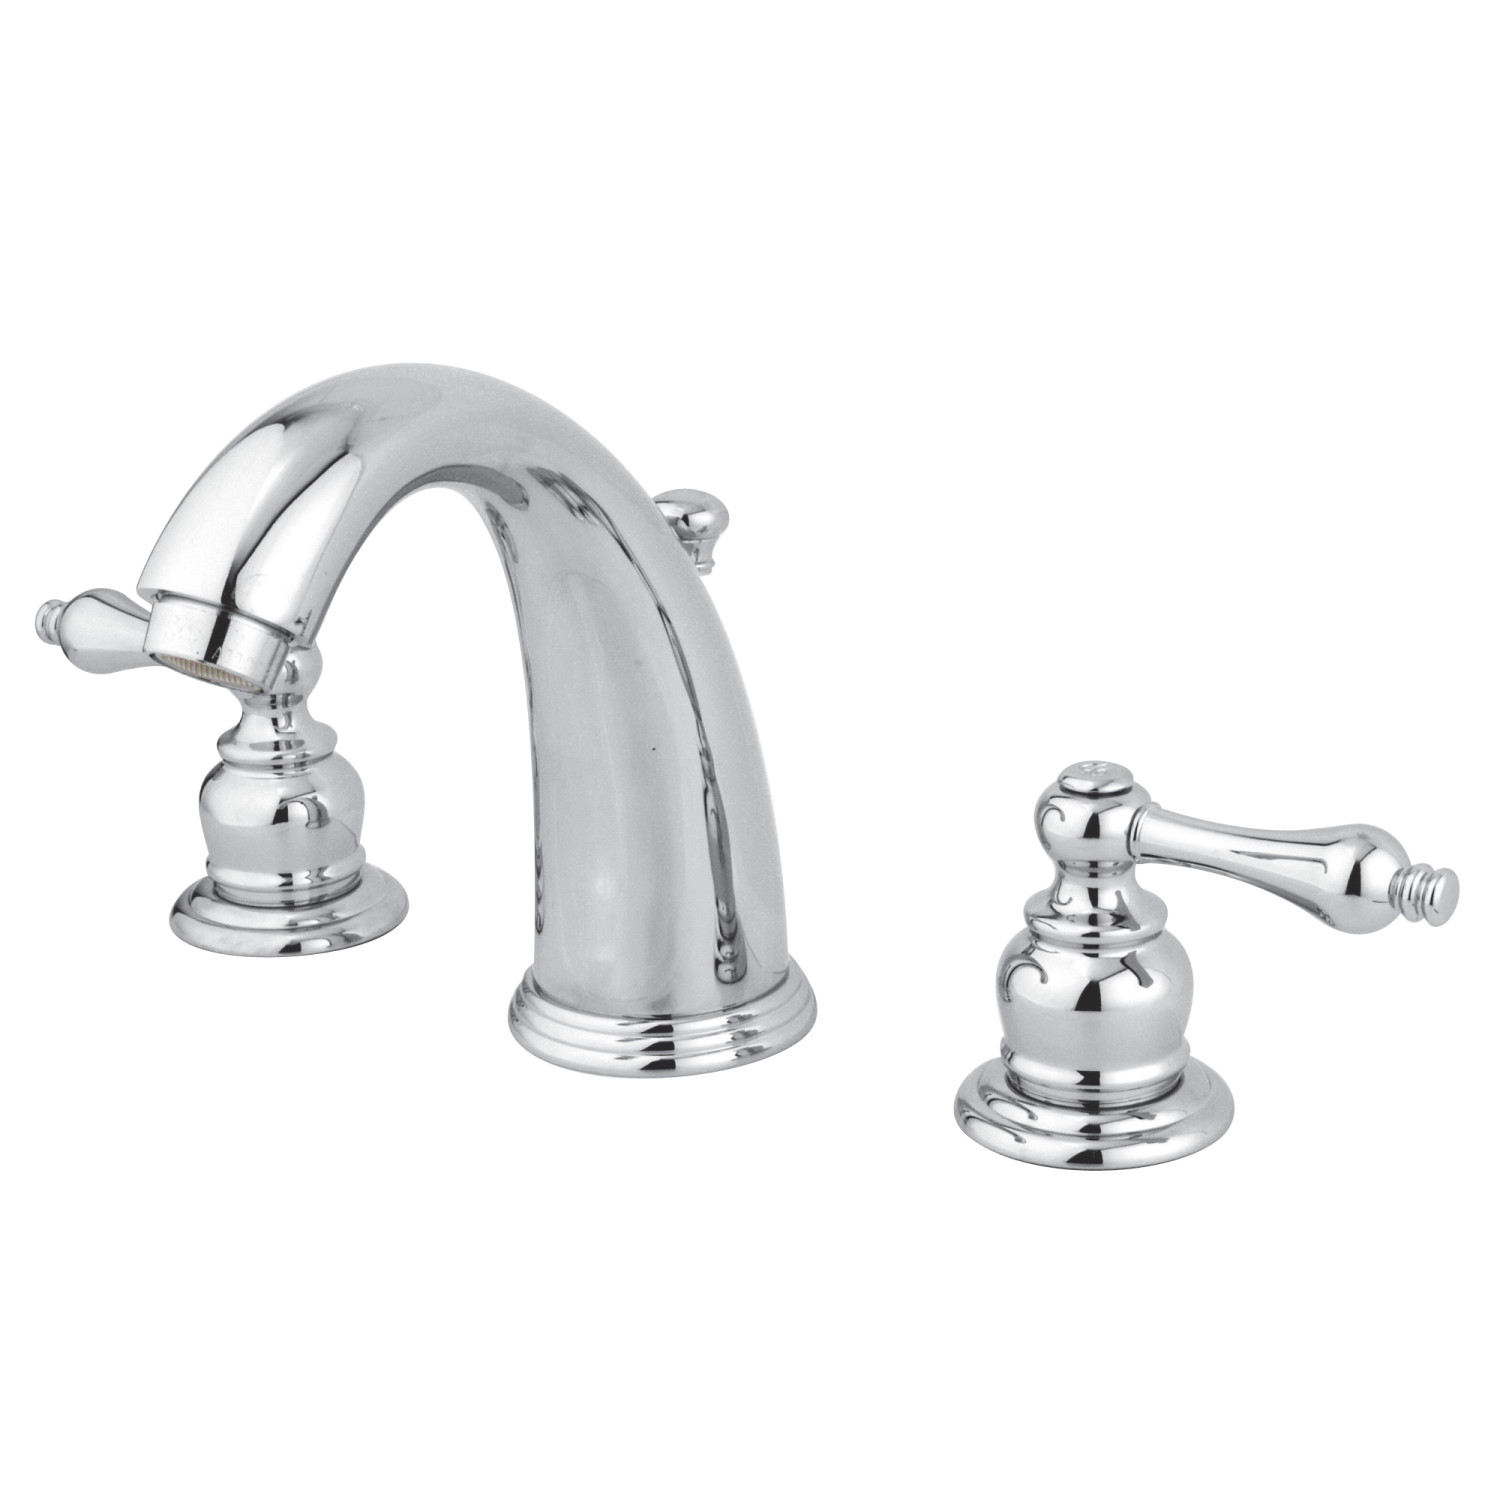 Traditional Two-Handle Three-Hole Deck Mounted Widespread Bathroom Faucet with Plastic Pop-Up in Polished Chrome Finish with 4 Color Options